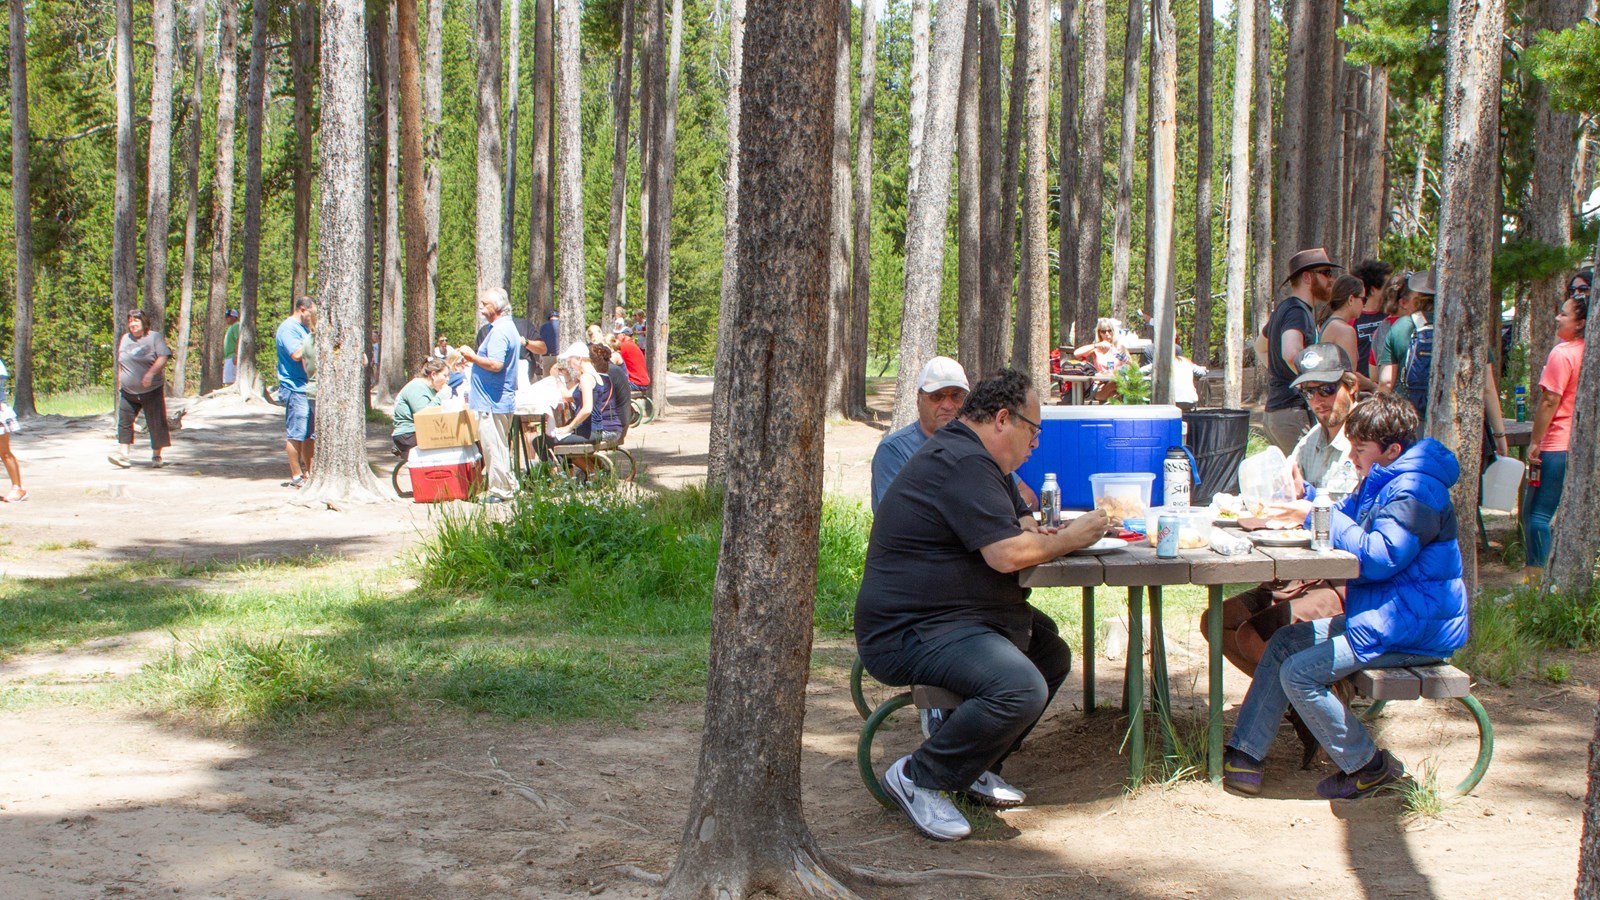 Picnic tables with people sitting in a forested area